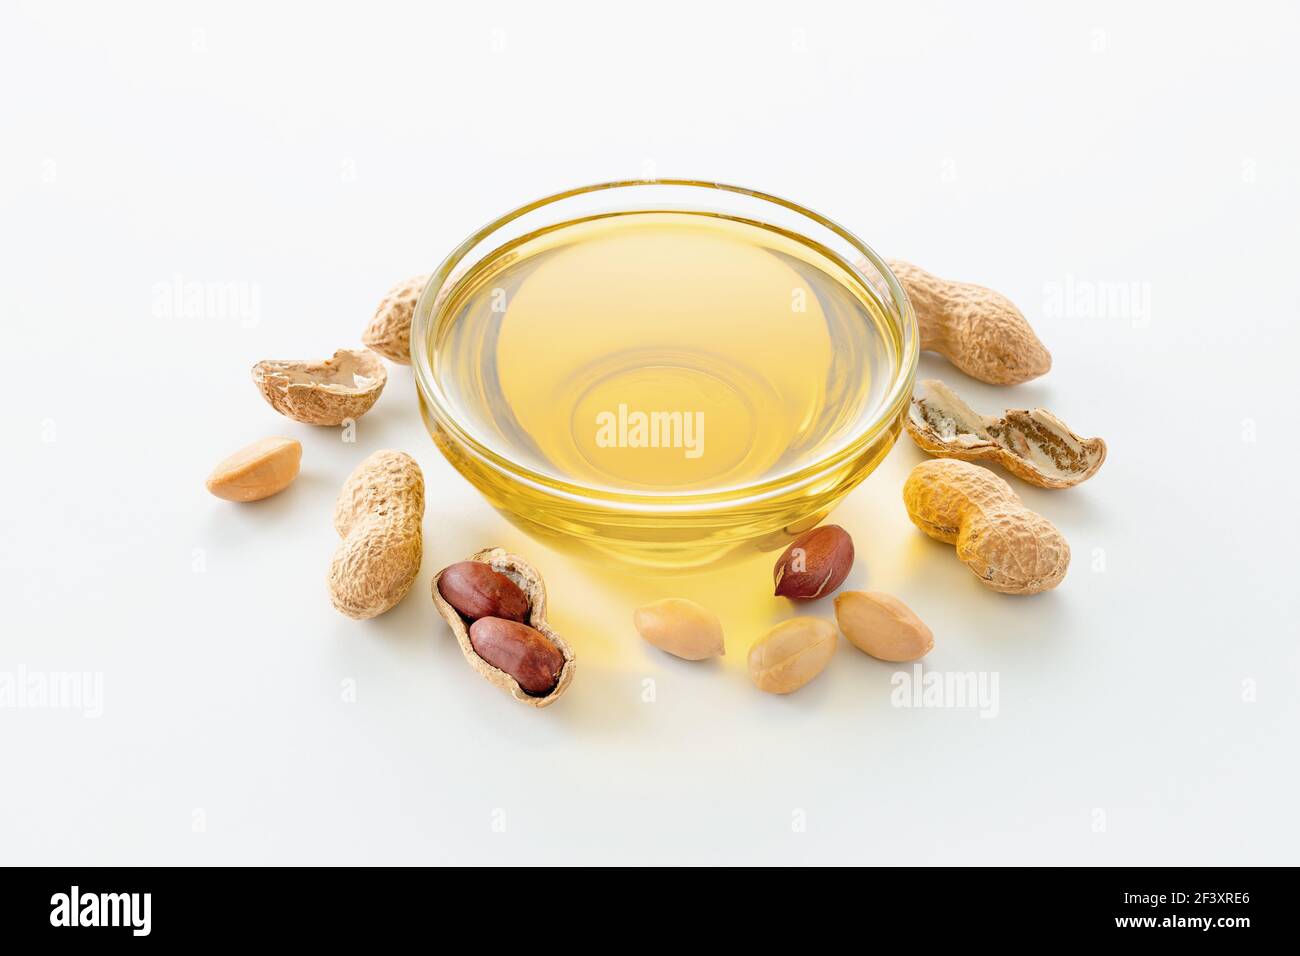 Natural peanut oil in a bowl with peanuts Stock Photo